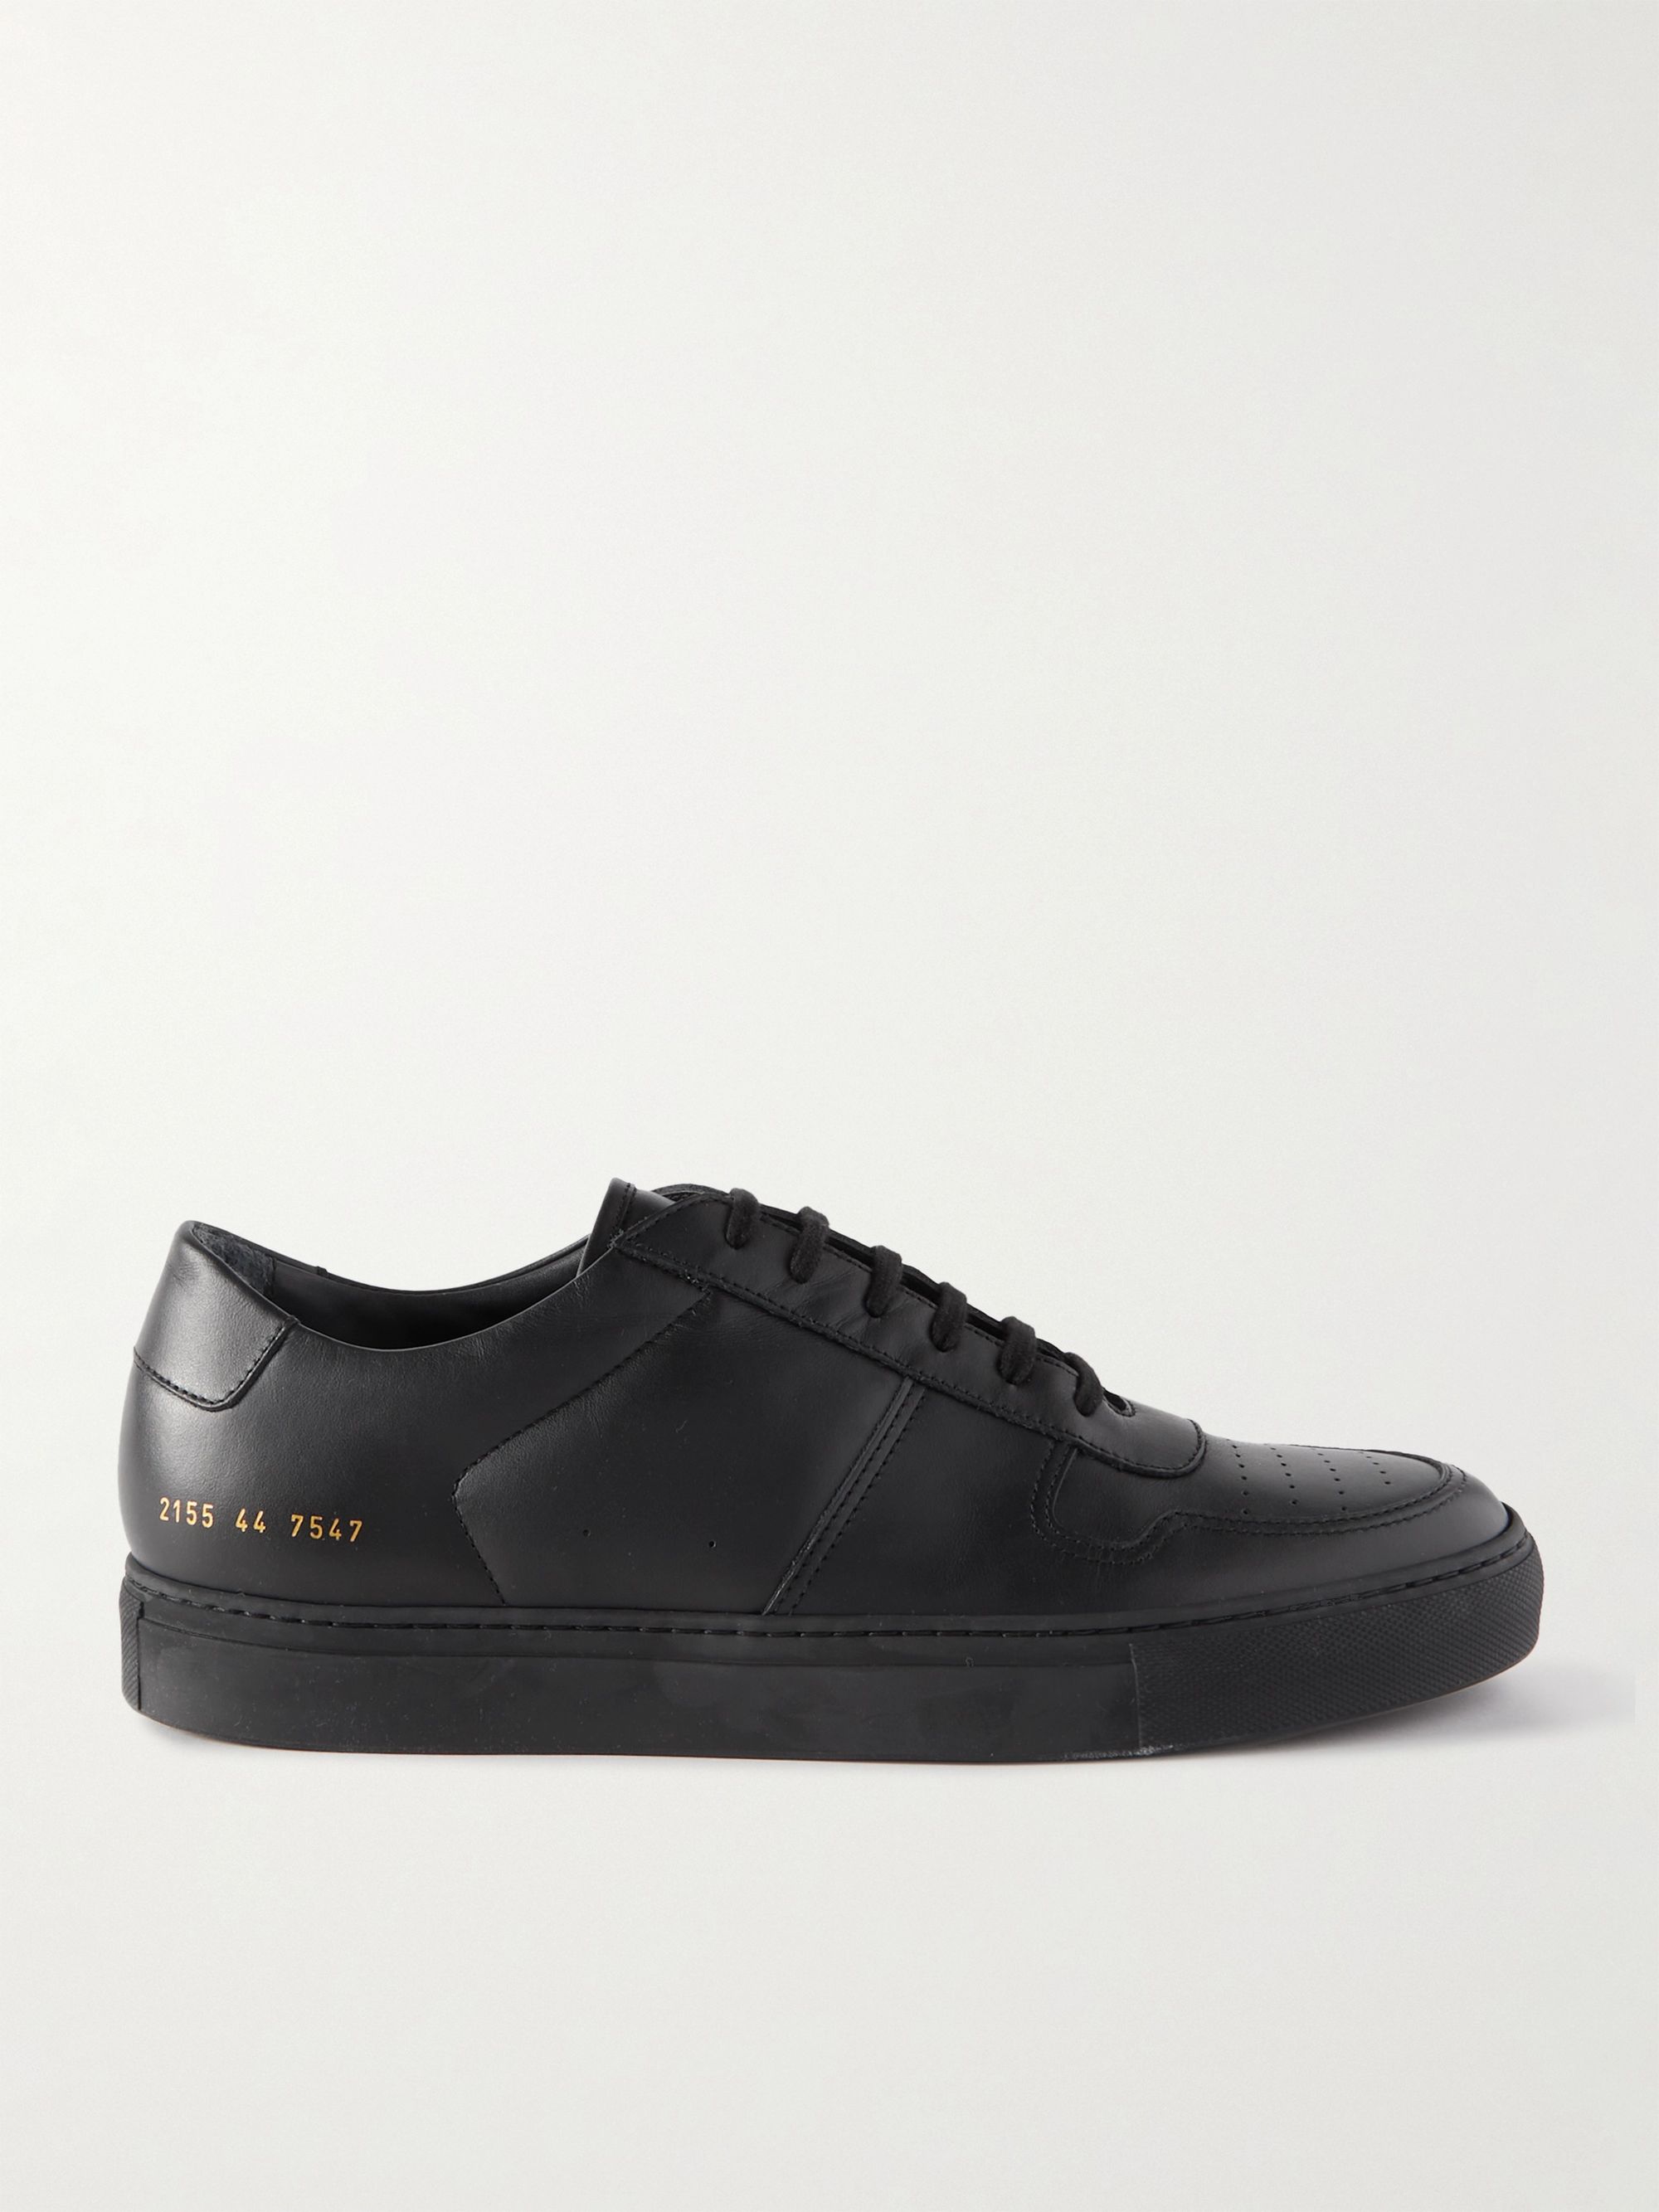 Black BBall Leather Sneakers | COMMON PROJECTS | MR PORTER